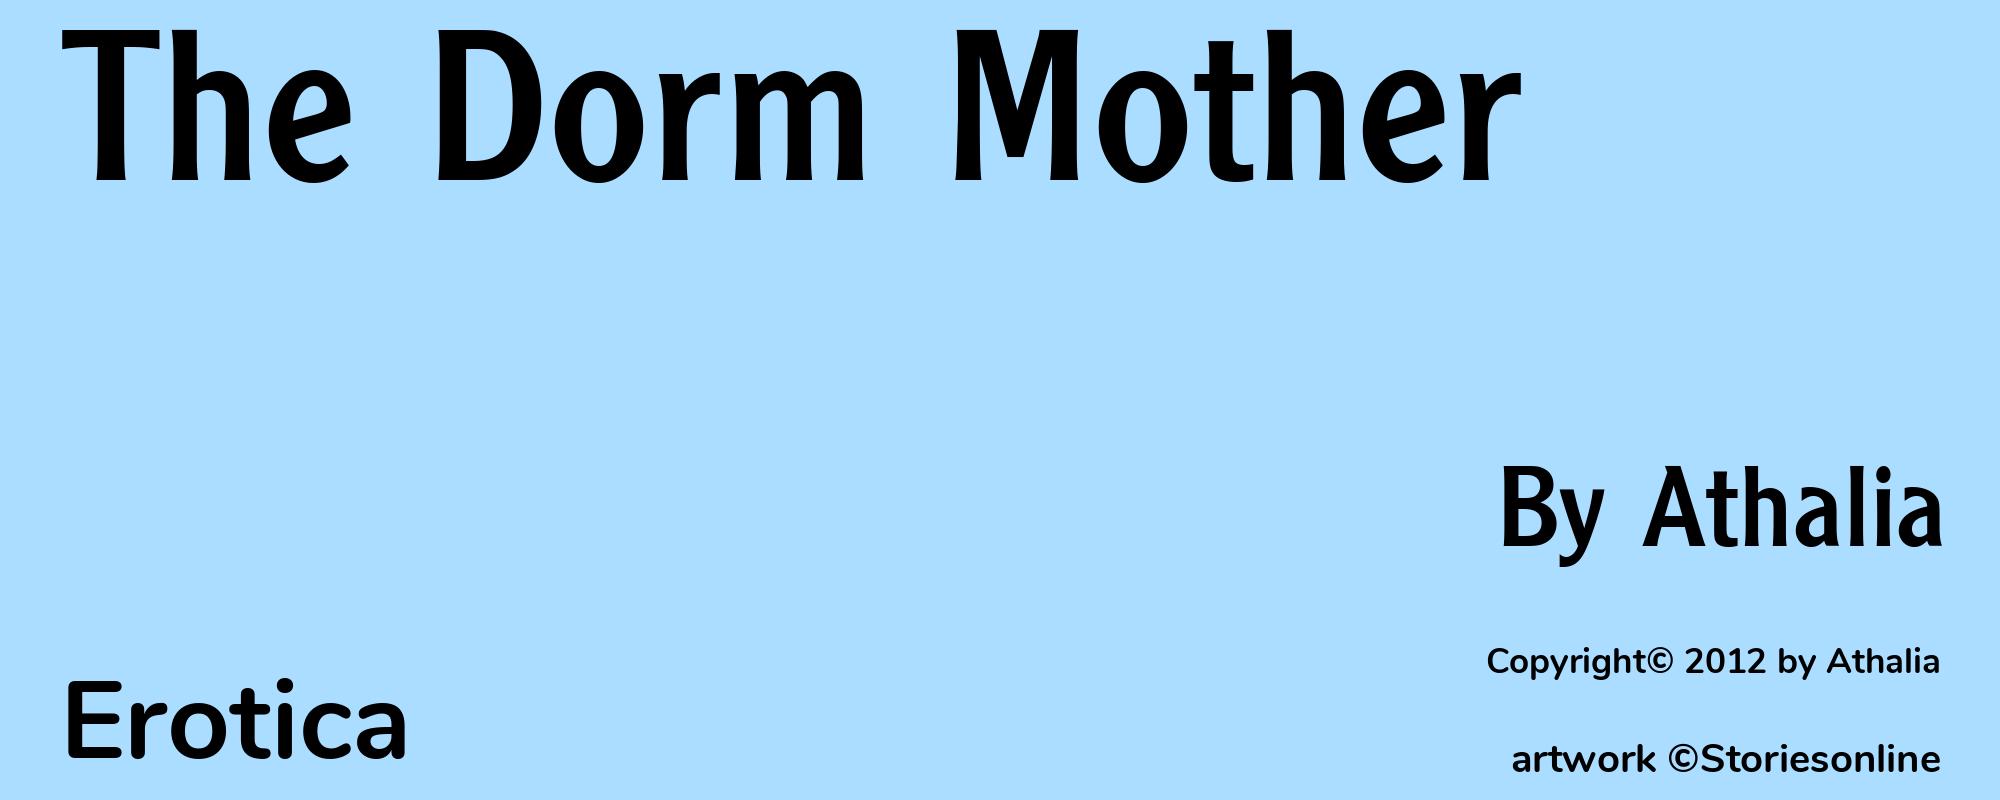 The Dorm Mother - Cover